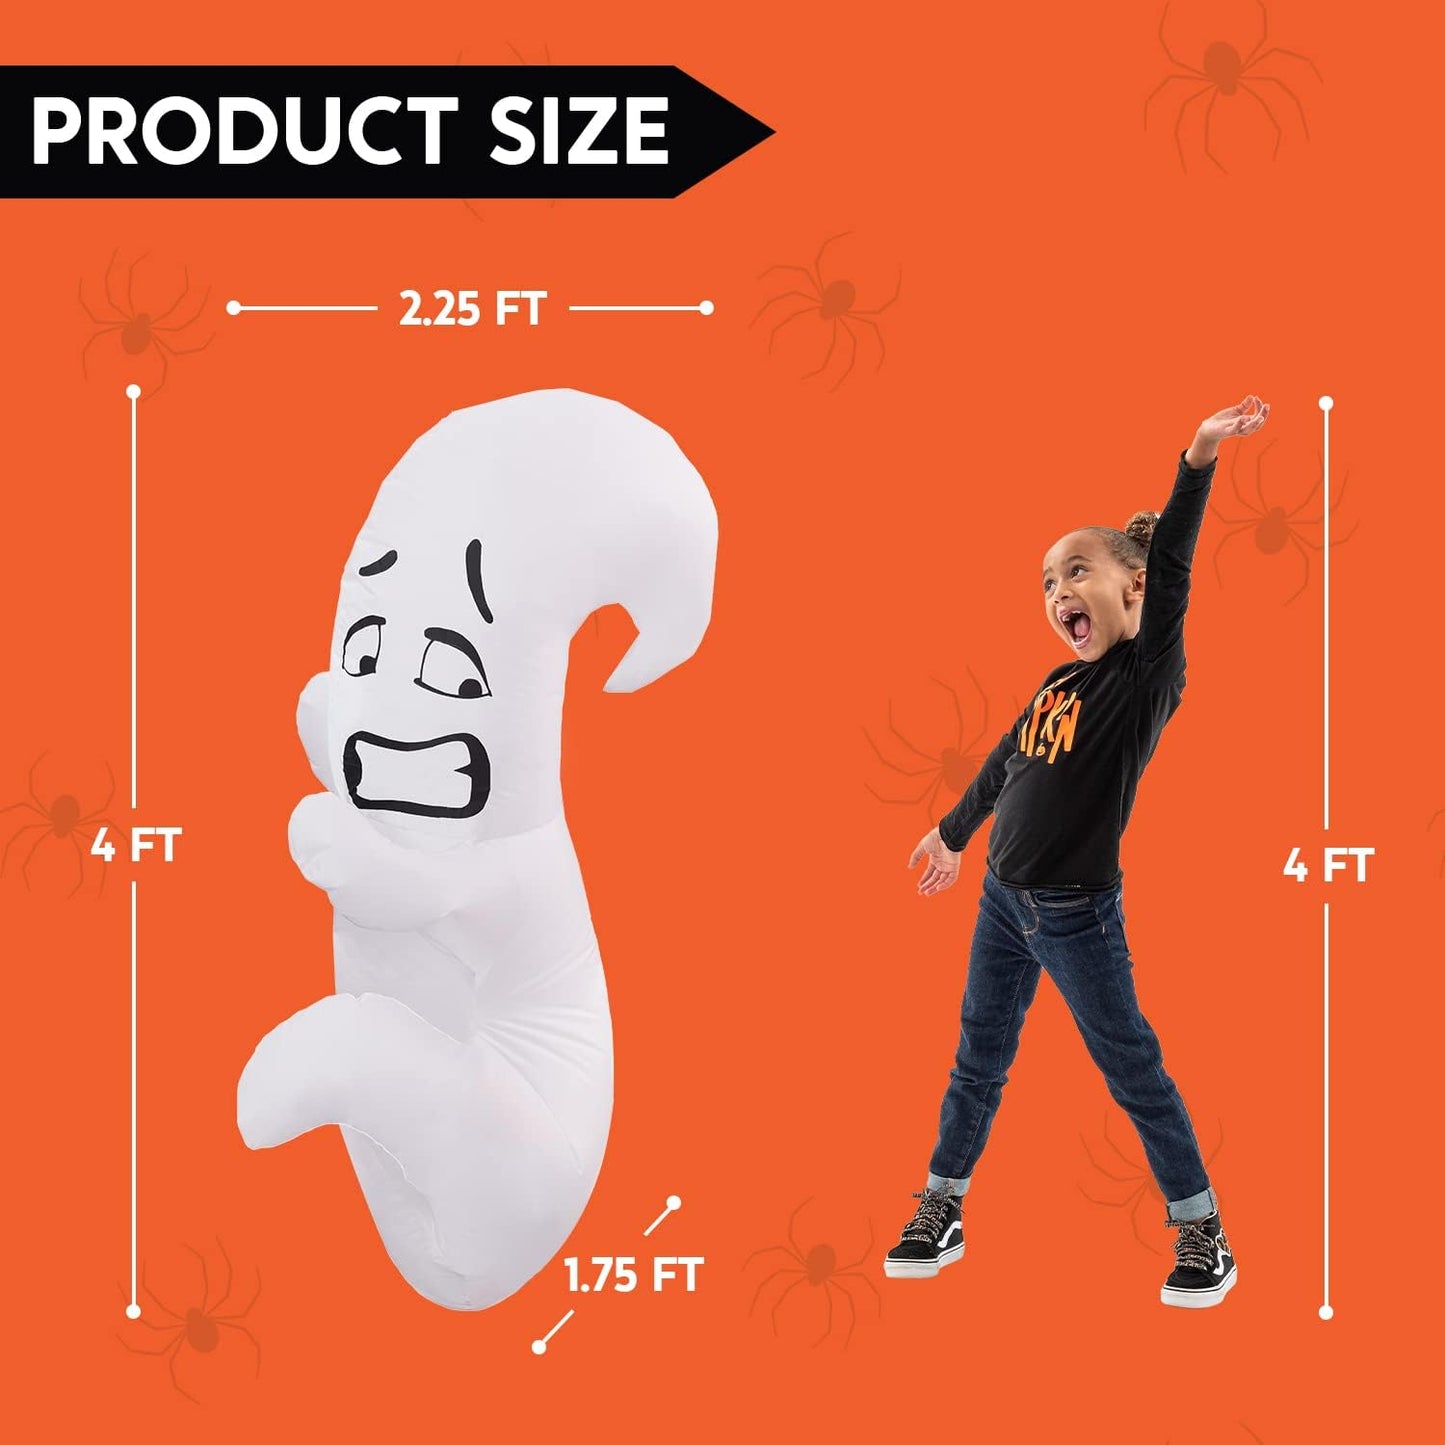 4 ft Tall Scared Cute Ghost Hugging Tree Halloween Inflatable